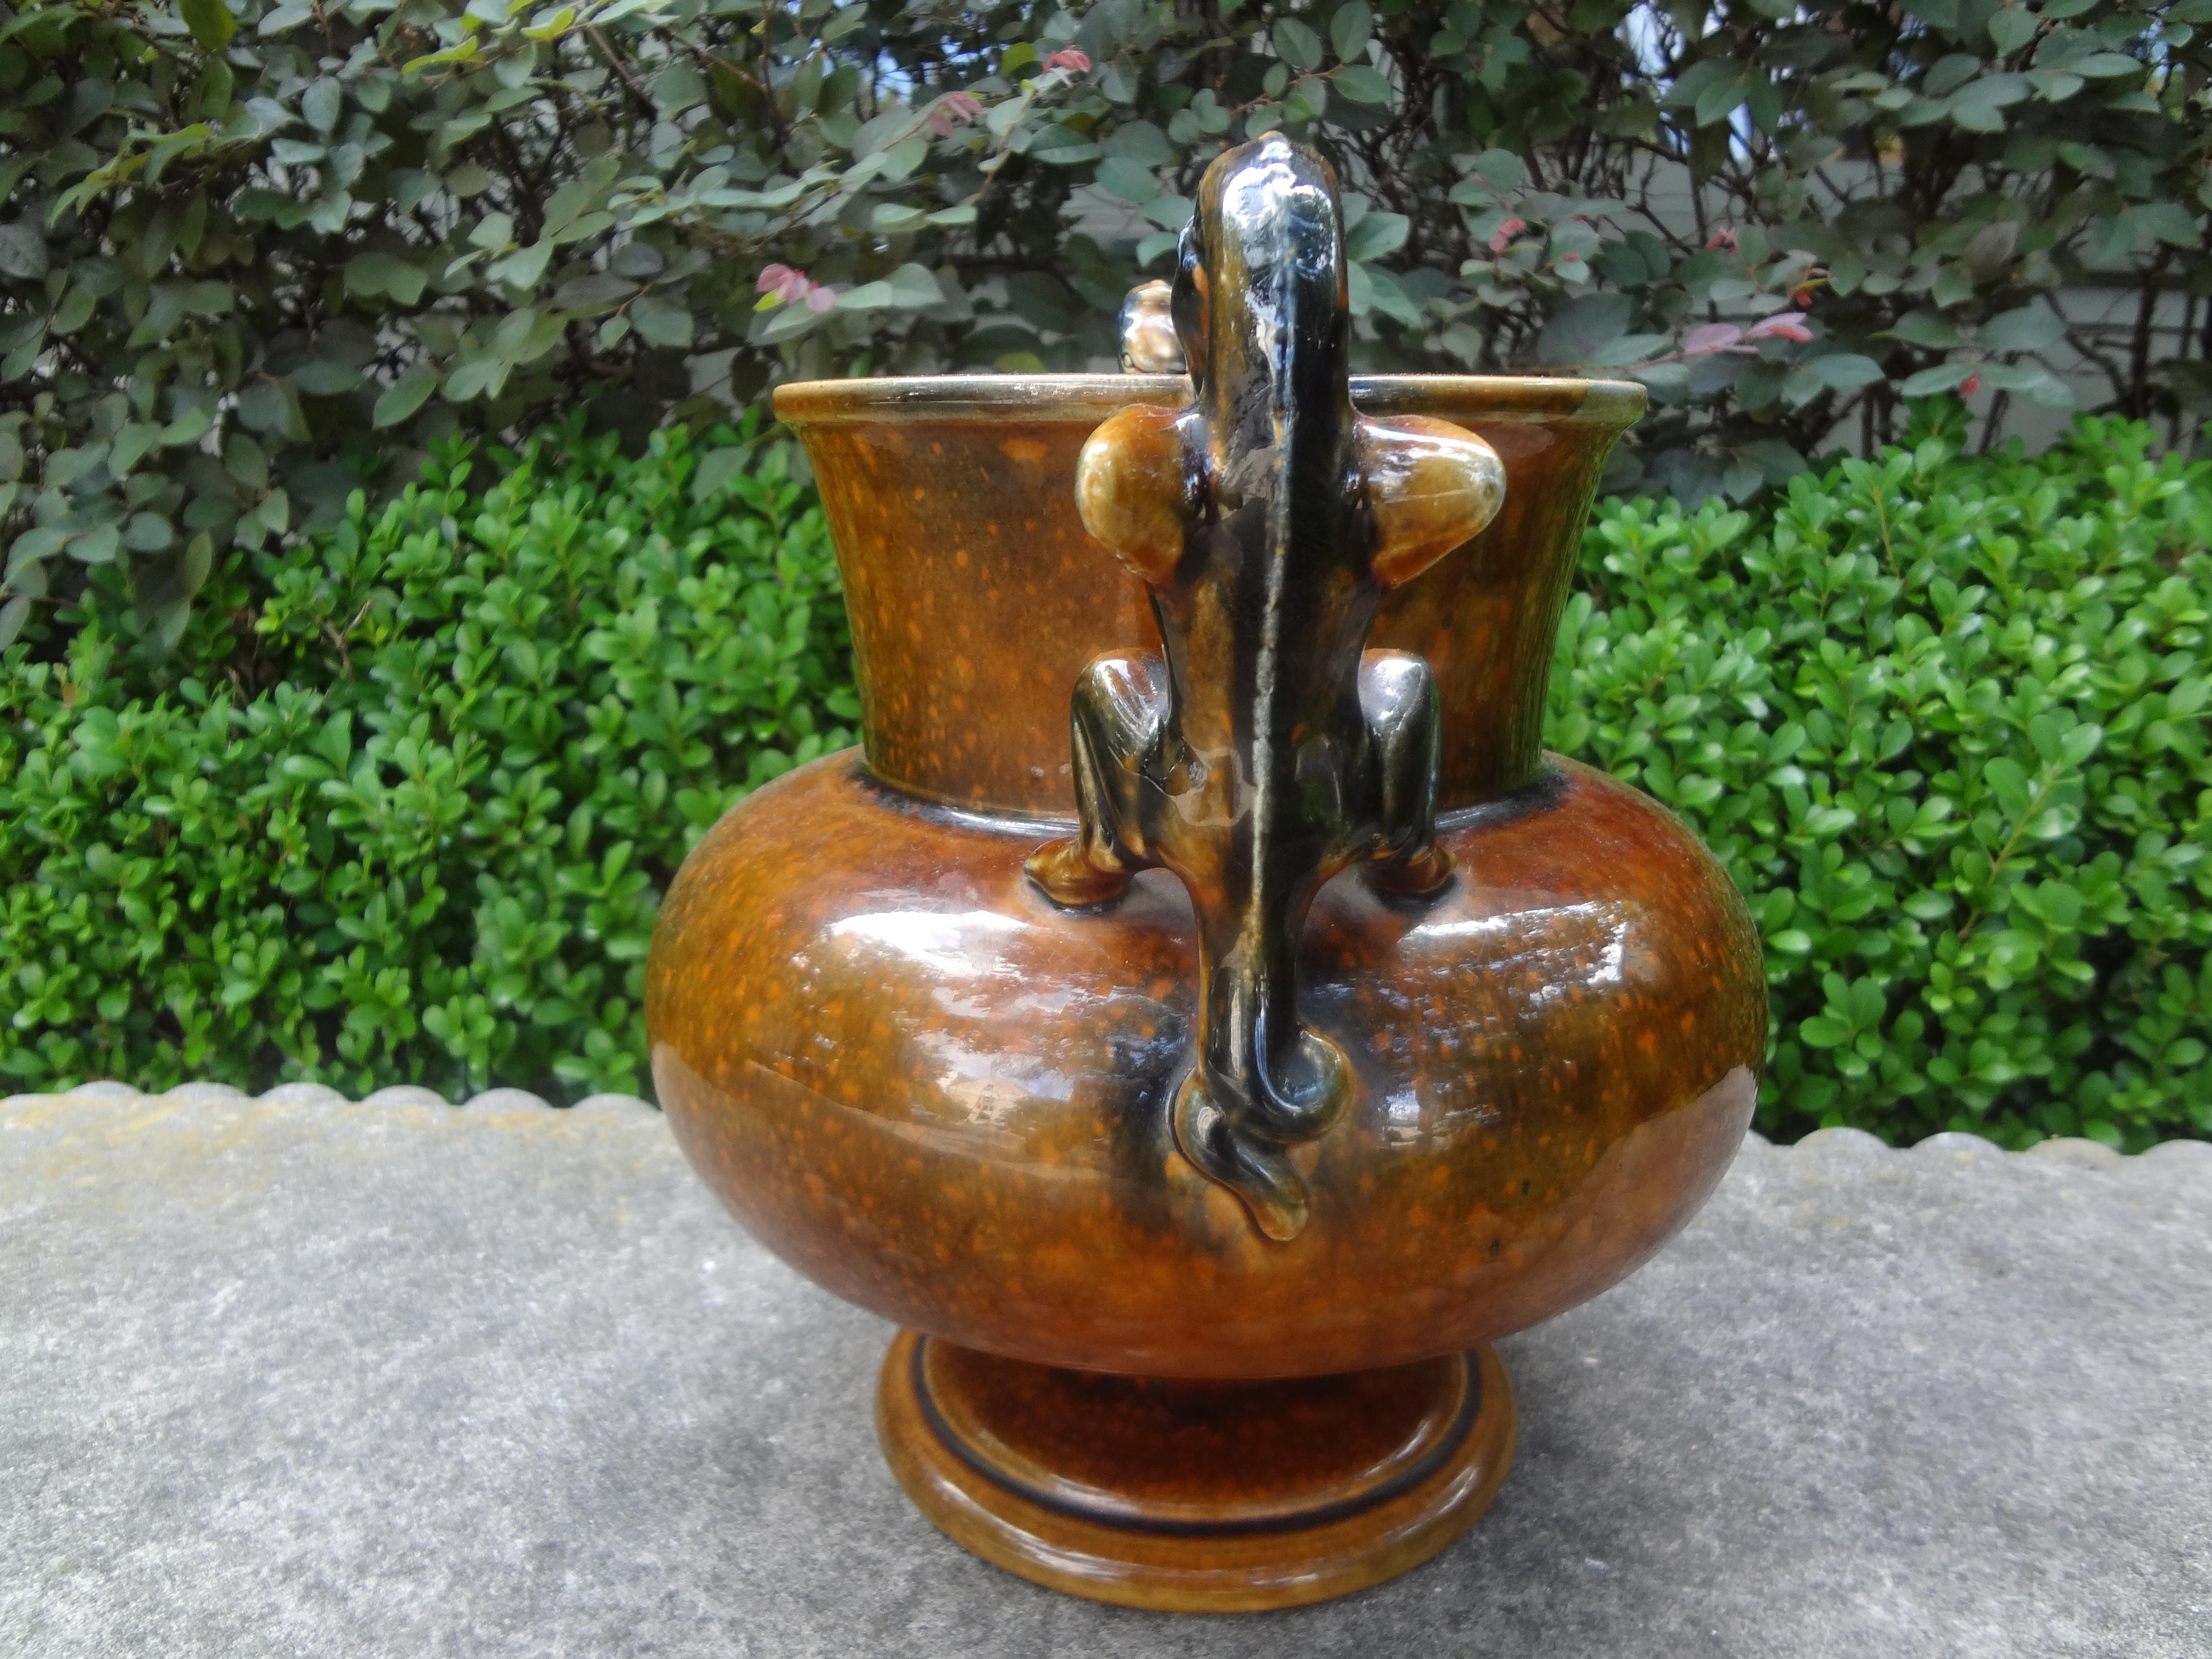 French Sarreguemines style glazed ceramic urn with griffin handles.
Handsome French sarreguemines style glazed ceramic urn, vase vessel with griffin handles. This interesting barbotine style urn has beautiful glaze and dates to the 1920s.